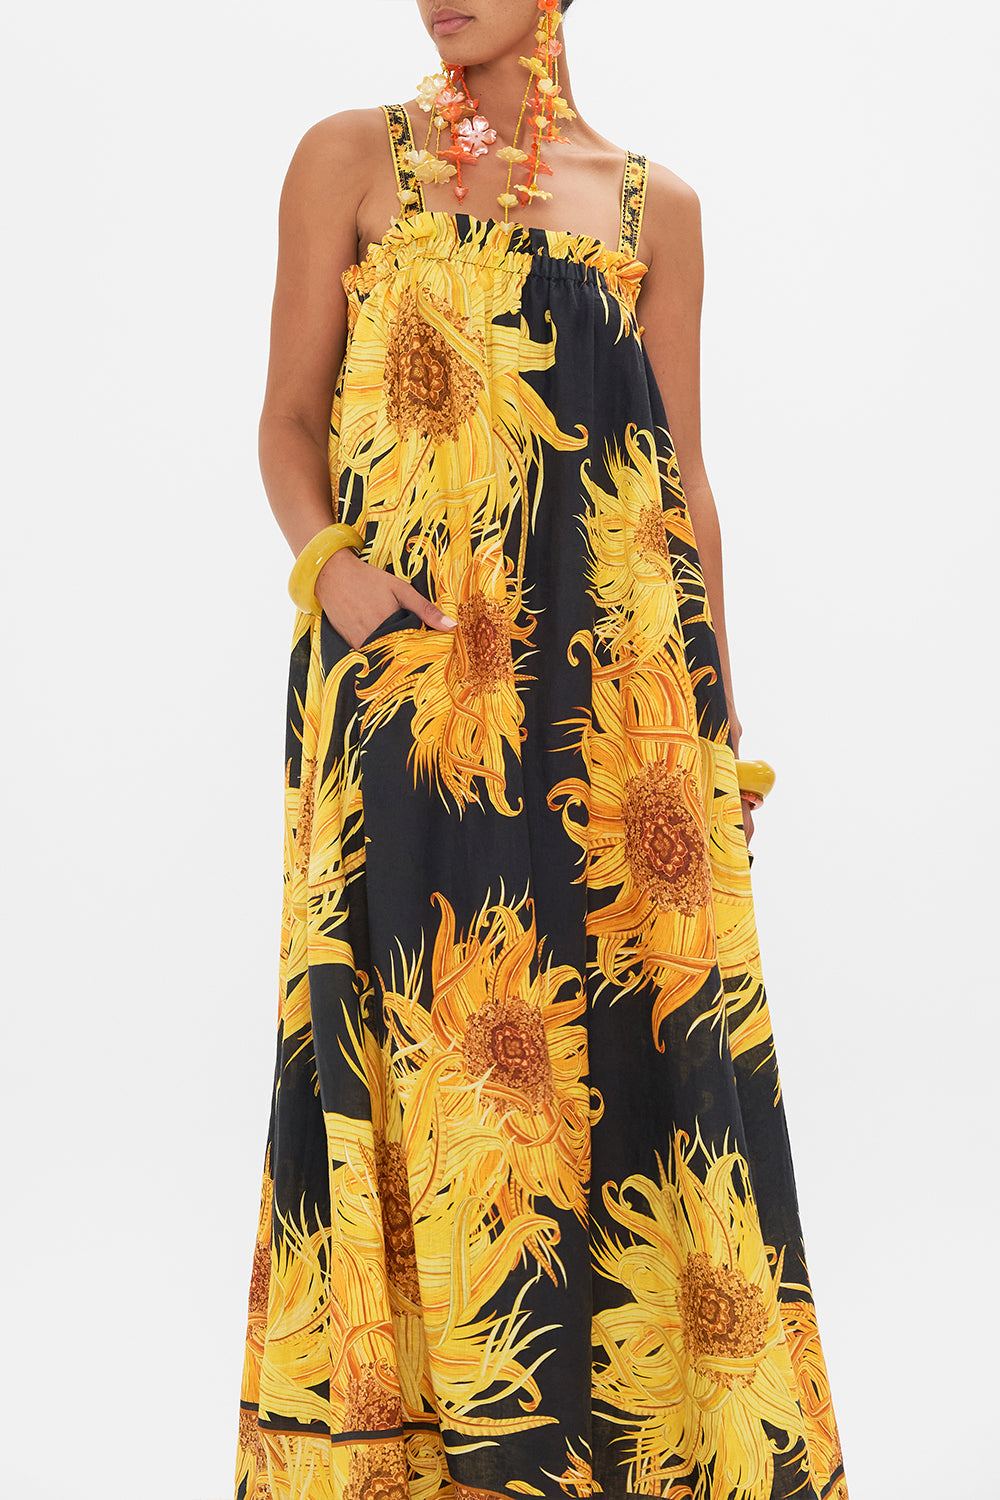 CAMILLA floral sundress in Make Me Your Masterpiece print